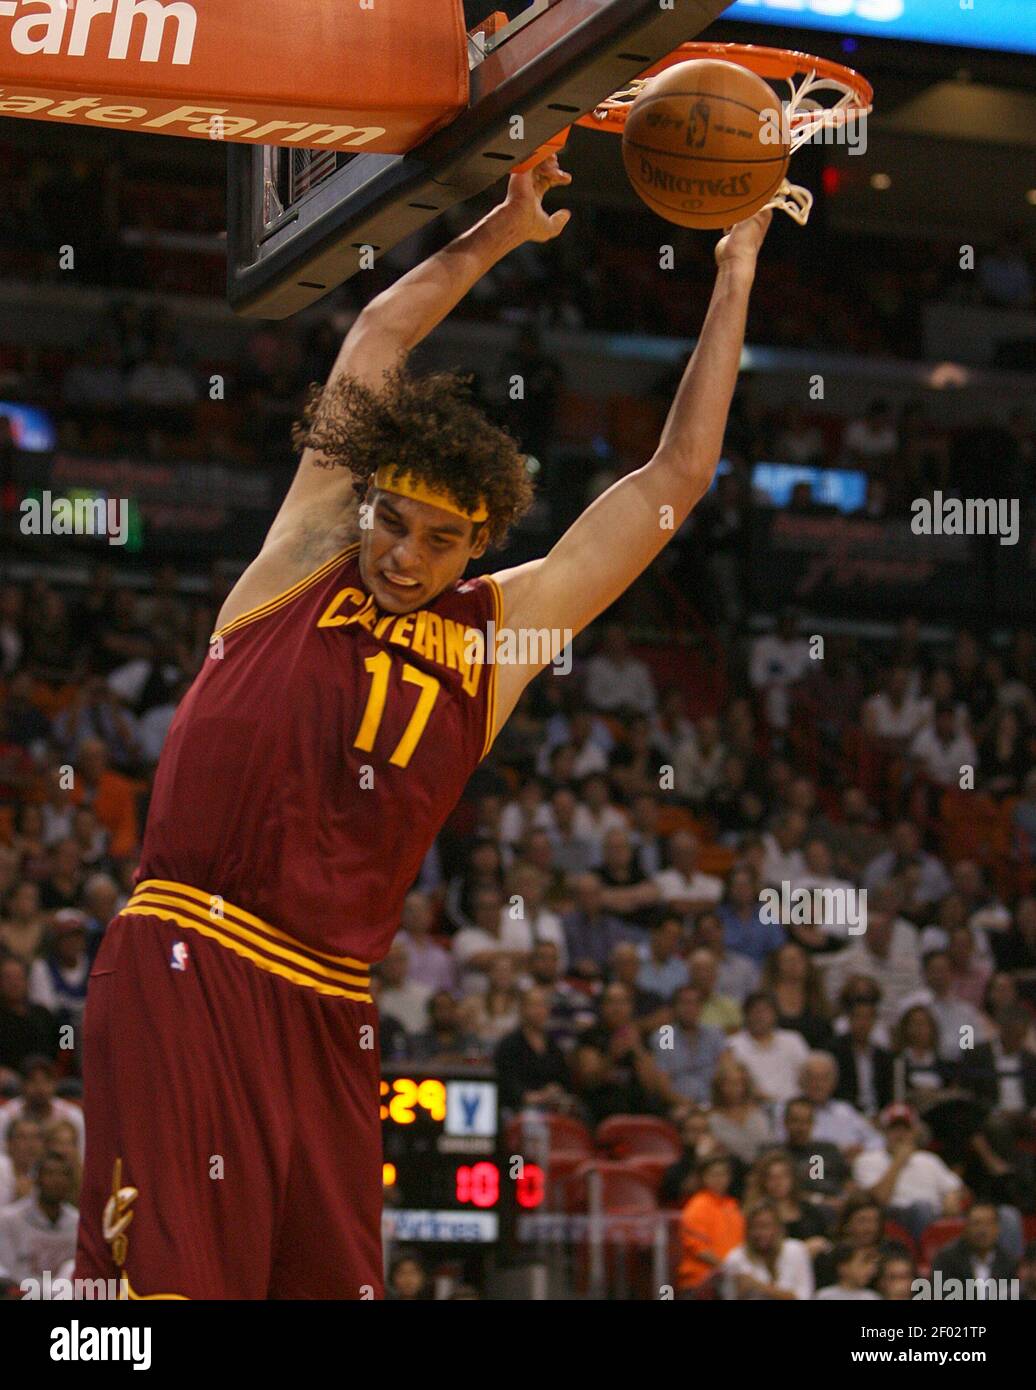 Cleveland Cavaliers Anderson Varejao dunks against the Washington Wizards  during the first quarter at the Verizon Center in Washington on March 13,  2008 (UPI Photo/Alexis C. Glenn Stock Photo - Alamy